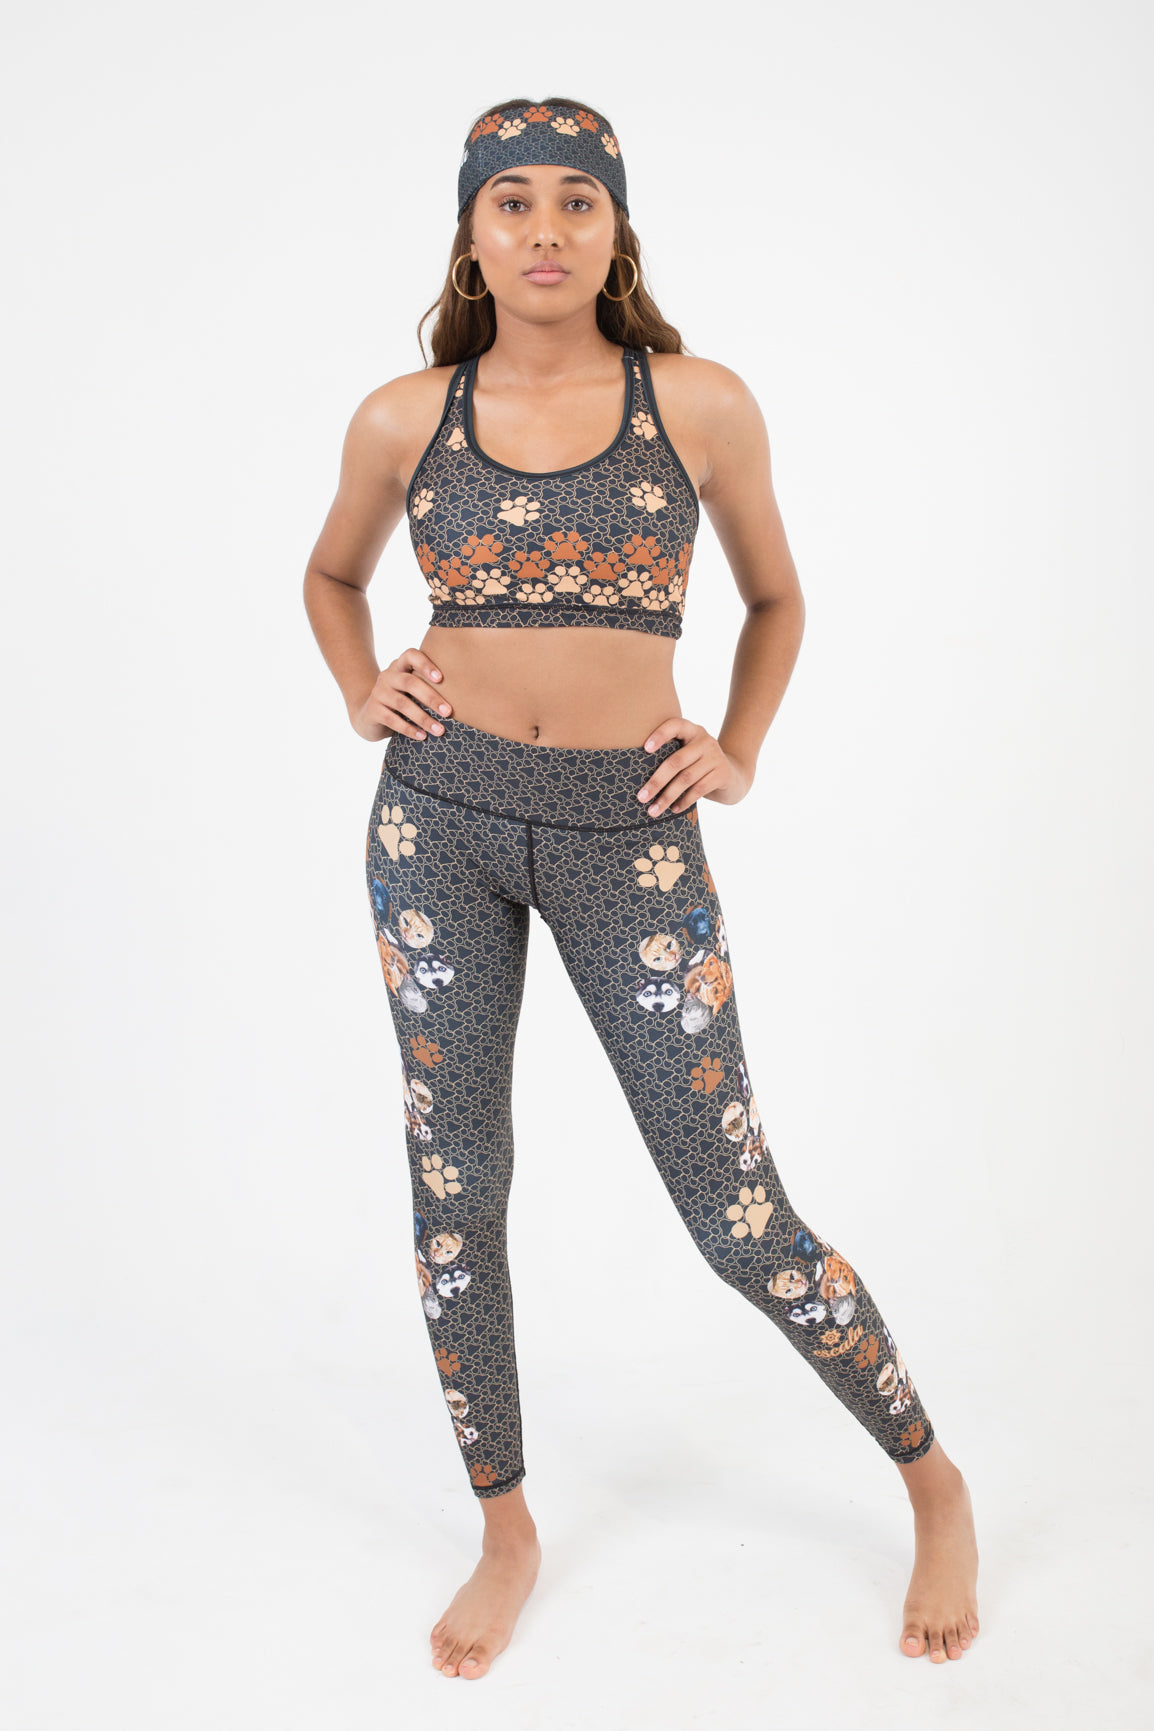 PUPPIES AND KITTENS LEGGINGS COMBO - Escala Activewear